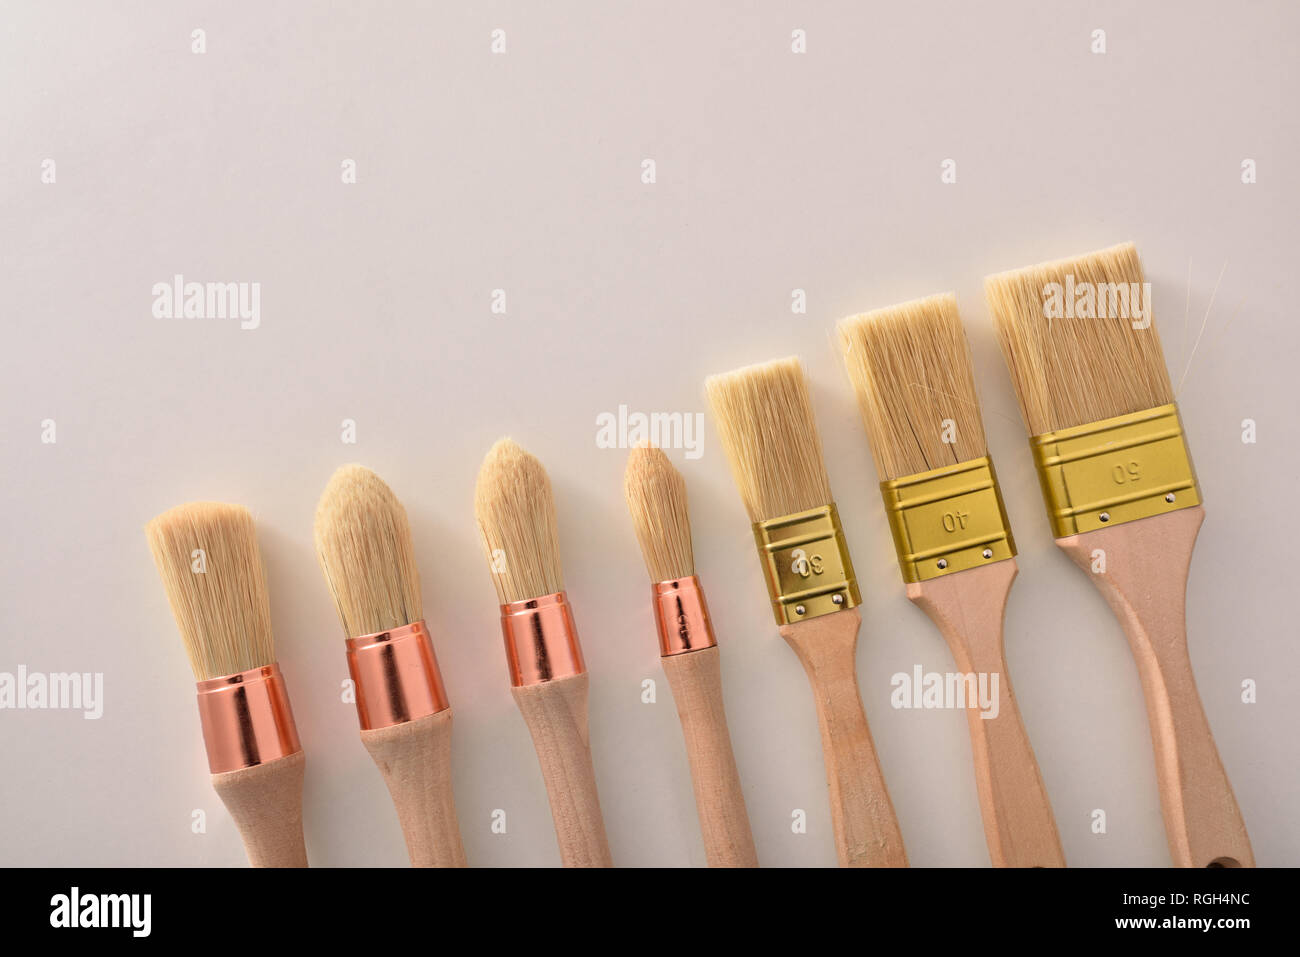 Set of paintbrushes for house painter of various sizes and shapes aligned diagonal on white table. Horizontal composition Stock Photo